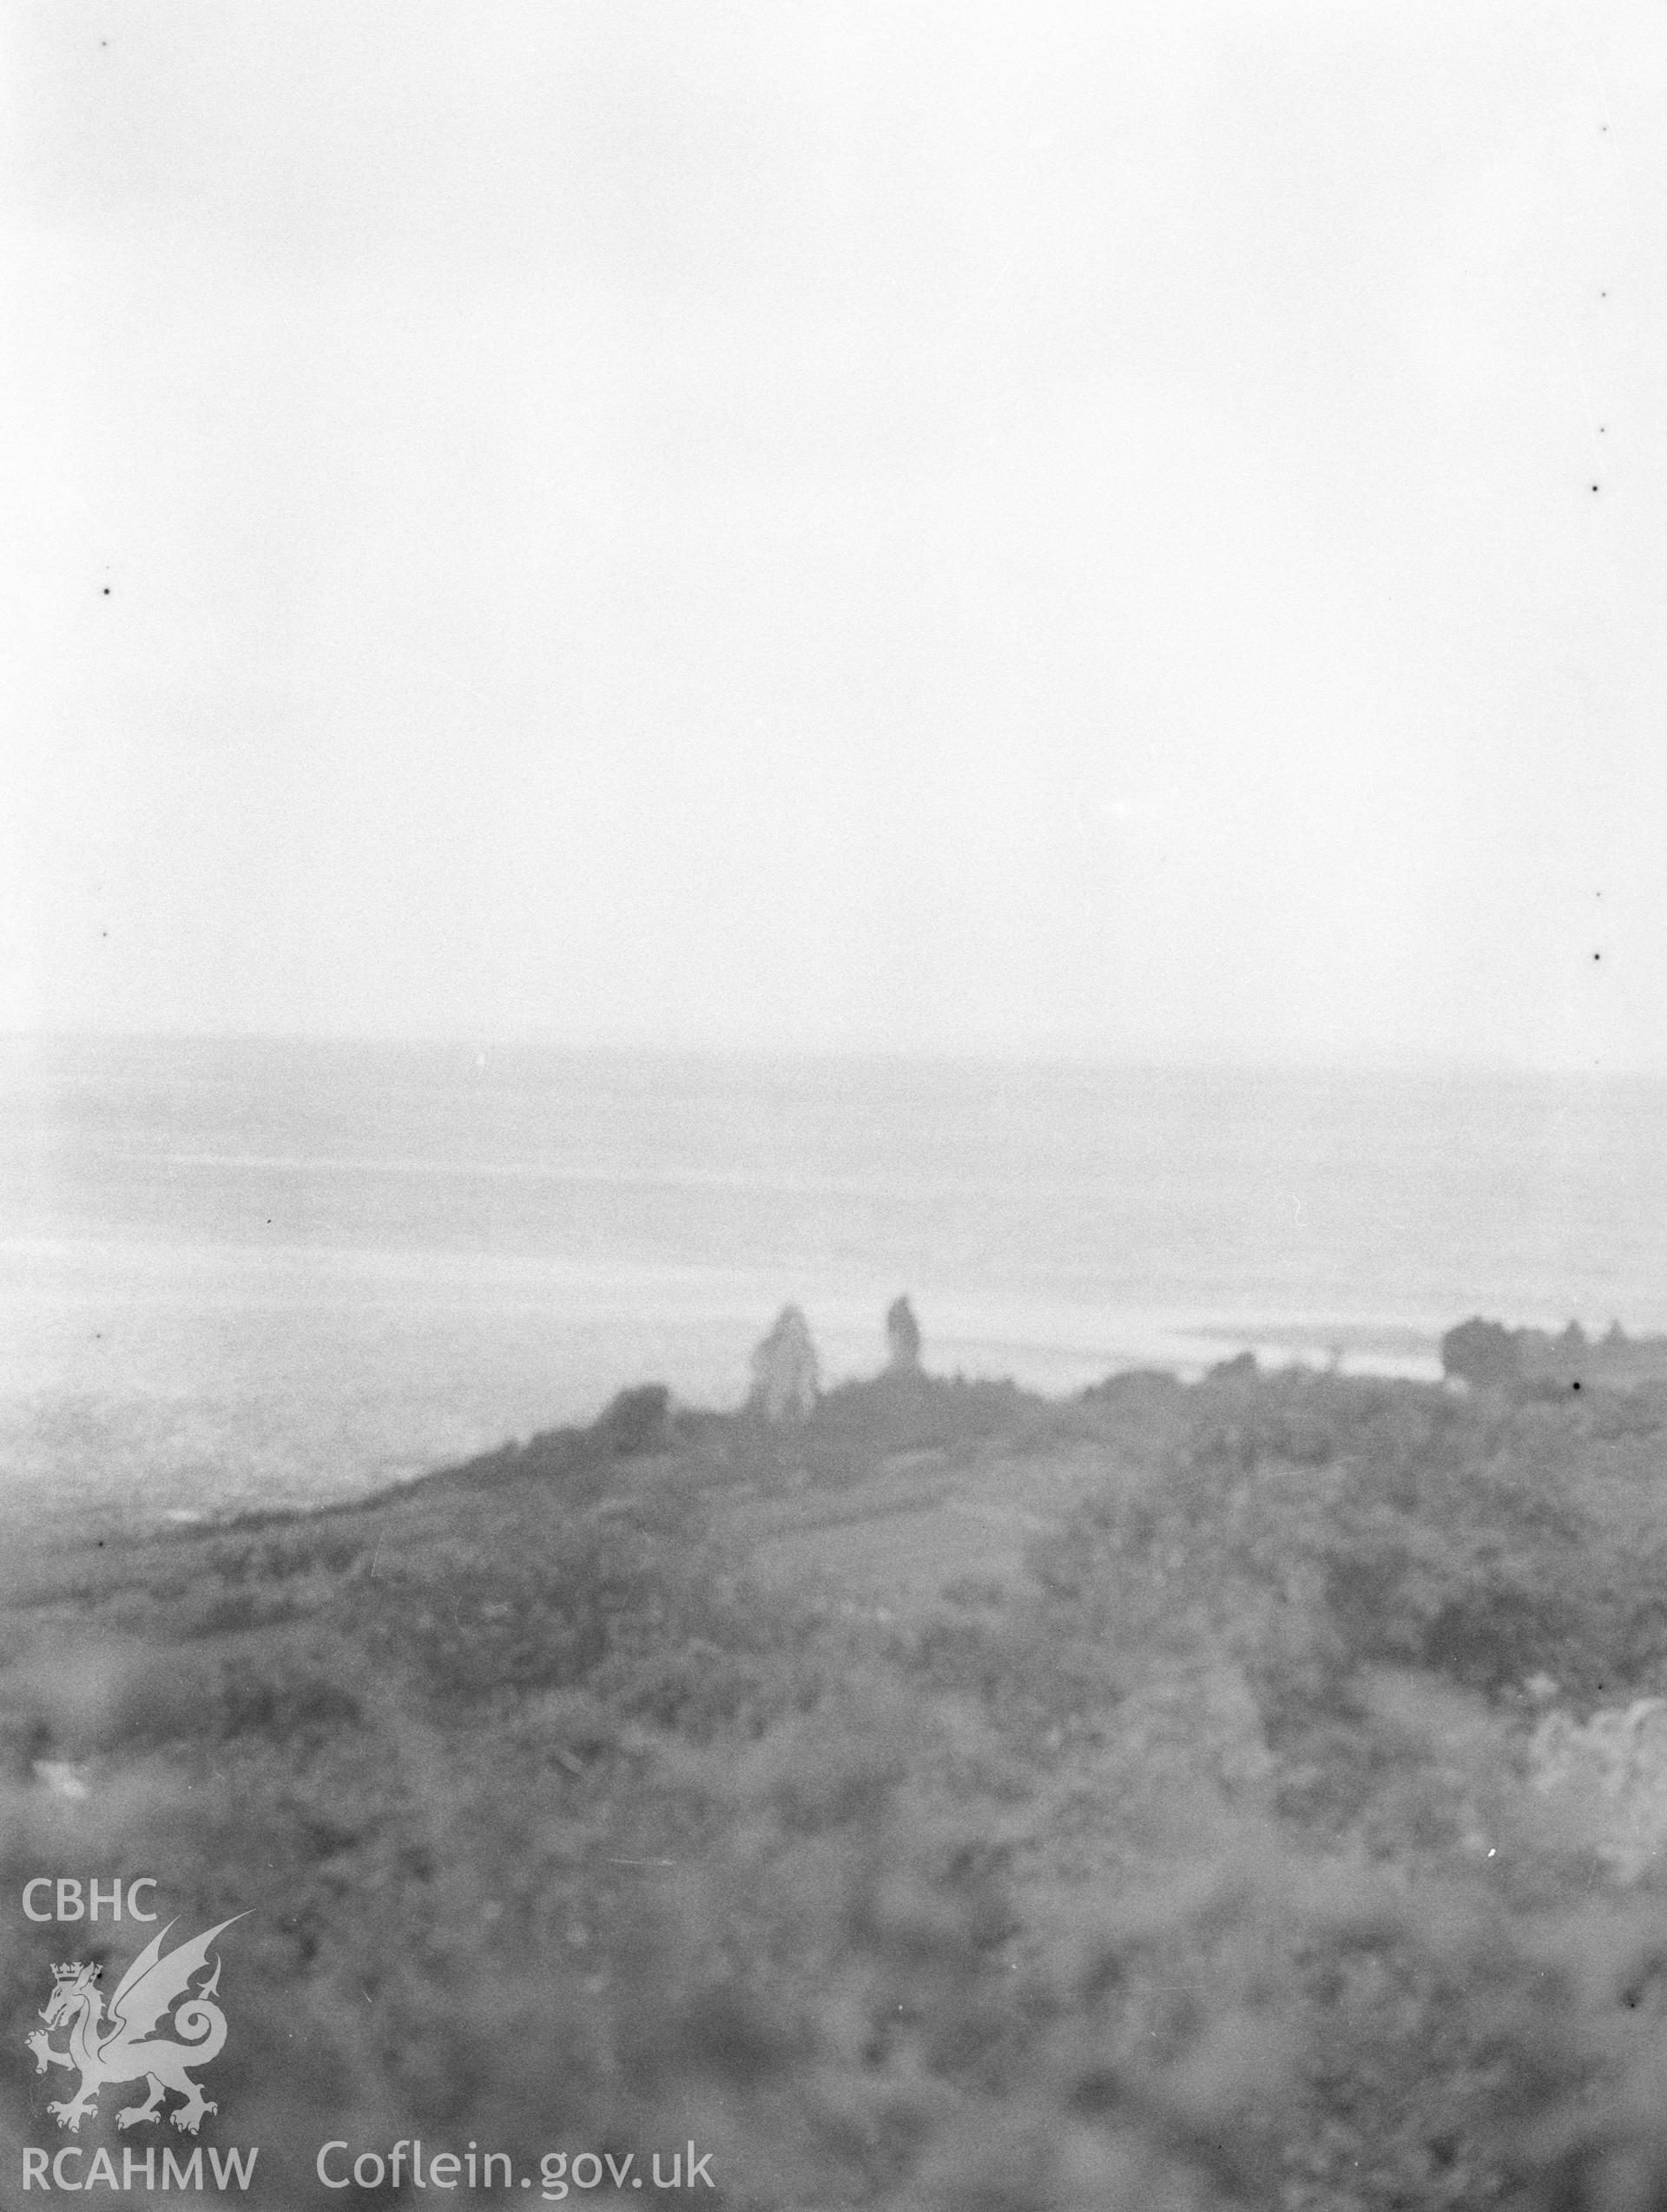 Digital copy of a nitrate negative showing exterior view of distant view of Gogarth Abbey Remains. From the National Building Record Postcard Collection.